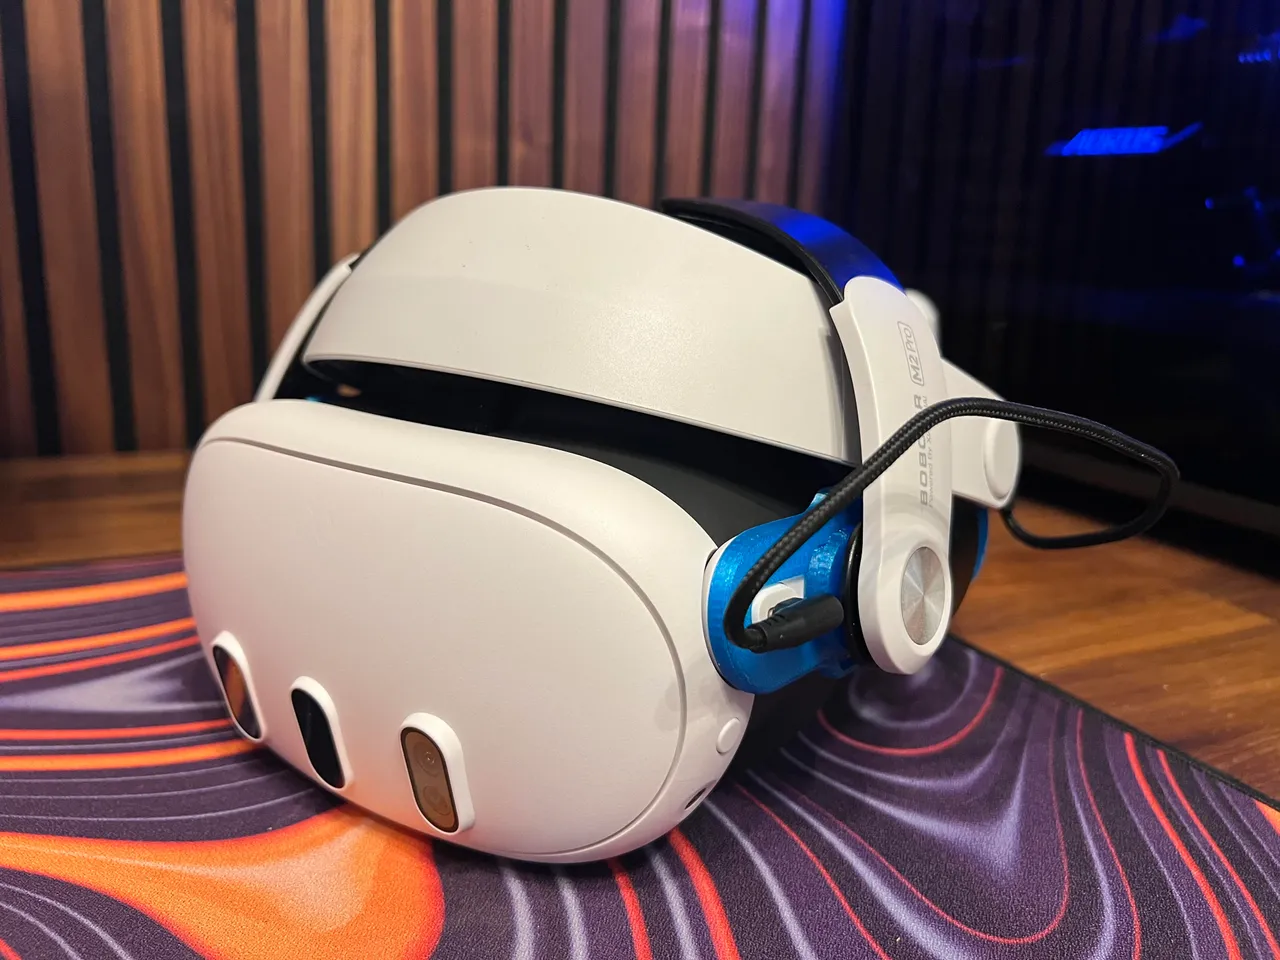 BOBOVR M3 PRO REVIEW AND SETUP ON META QUEST 3 